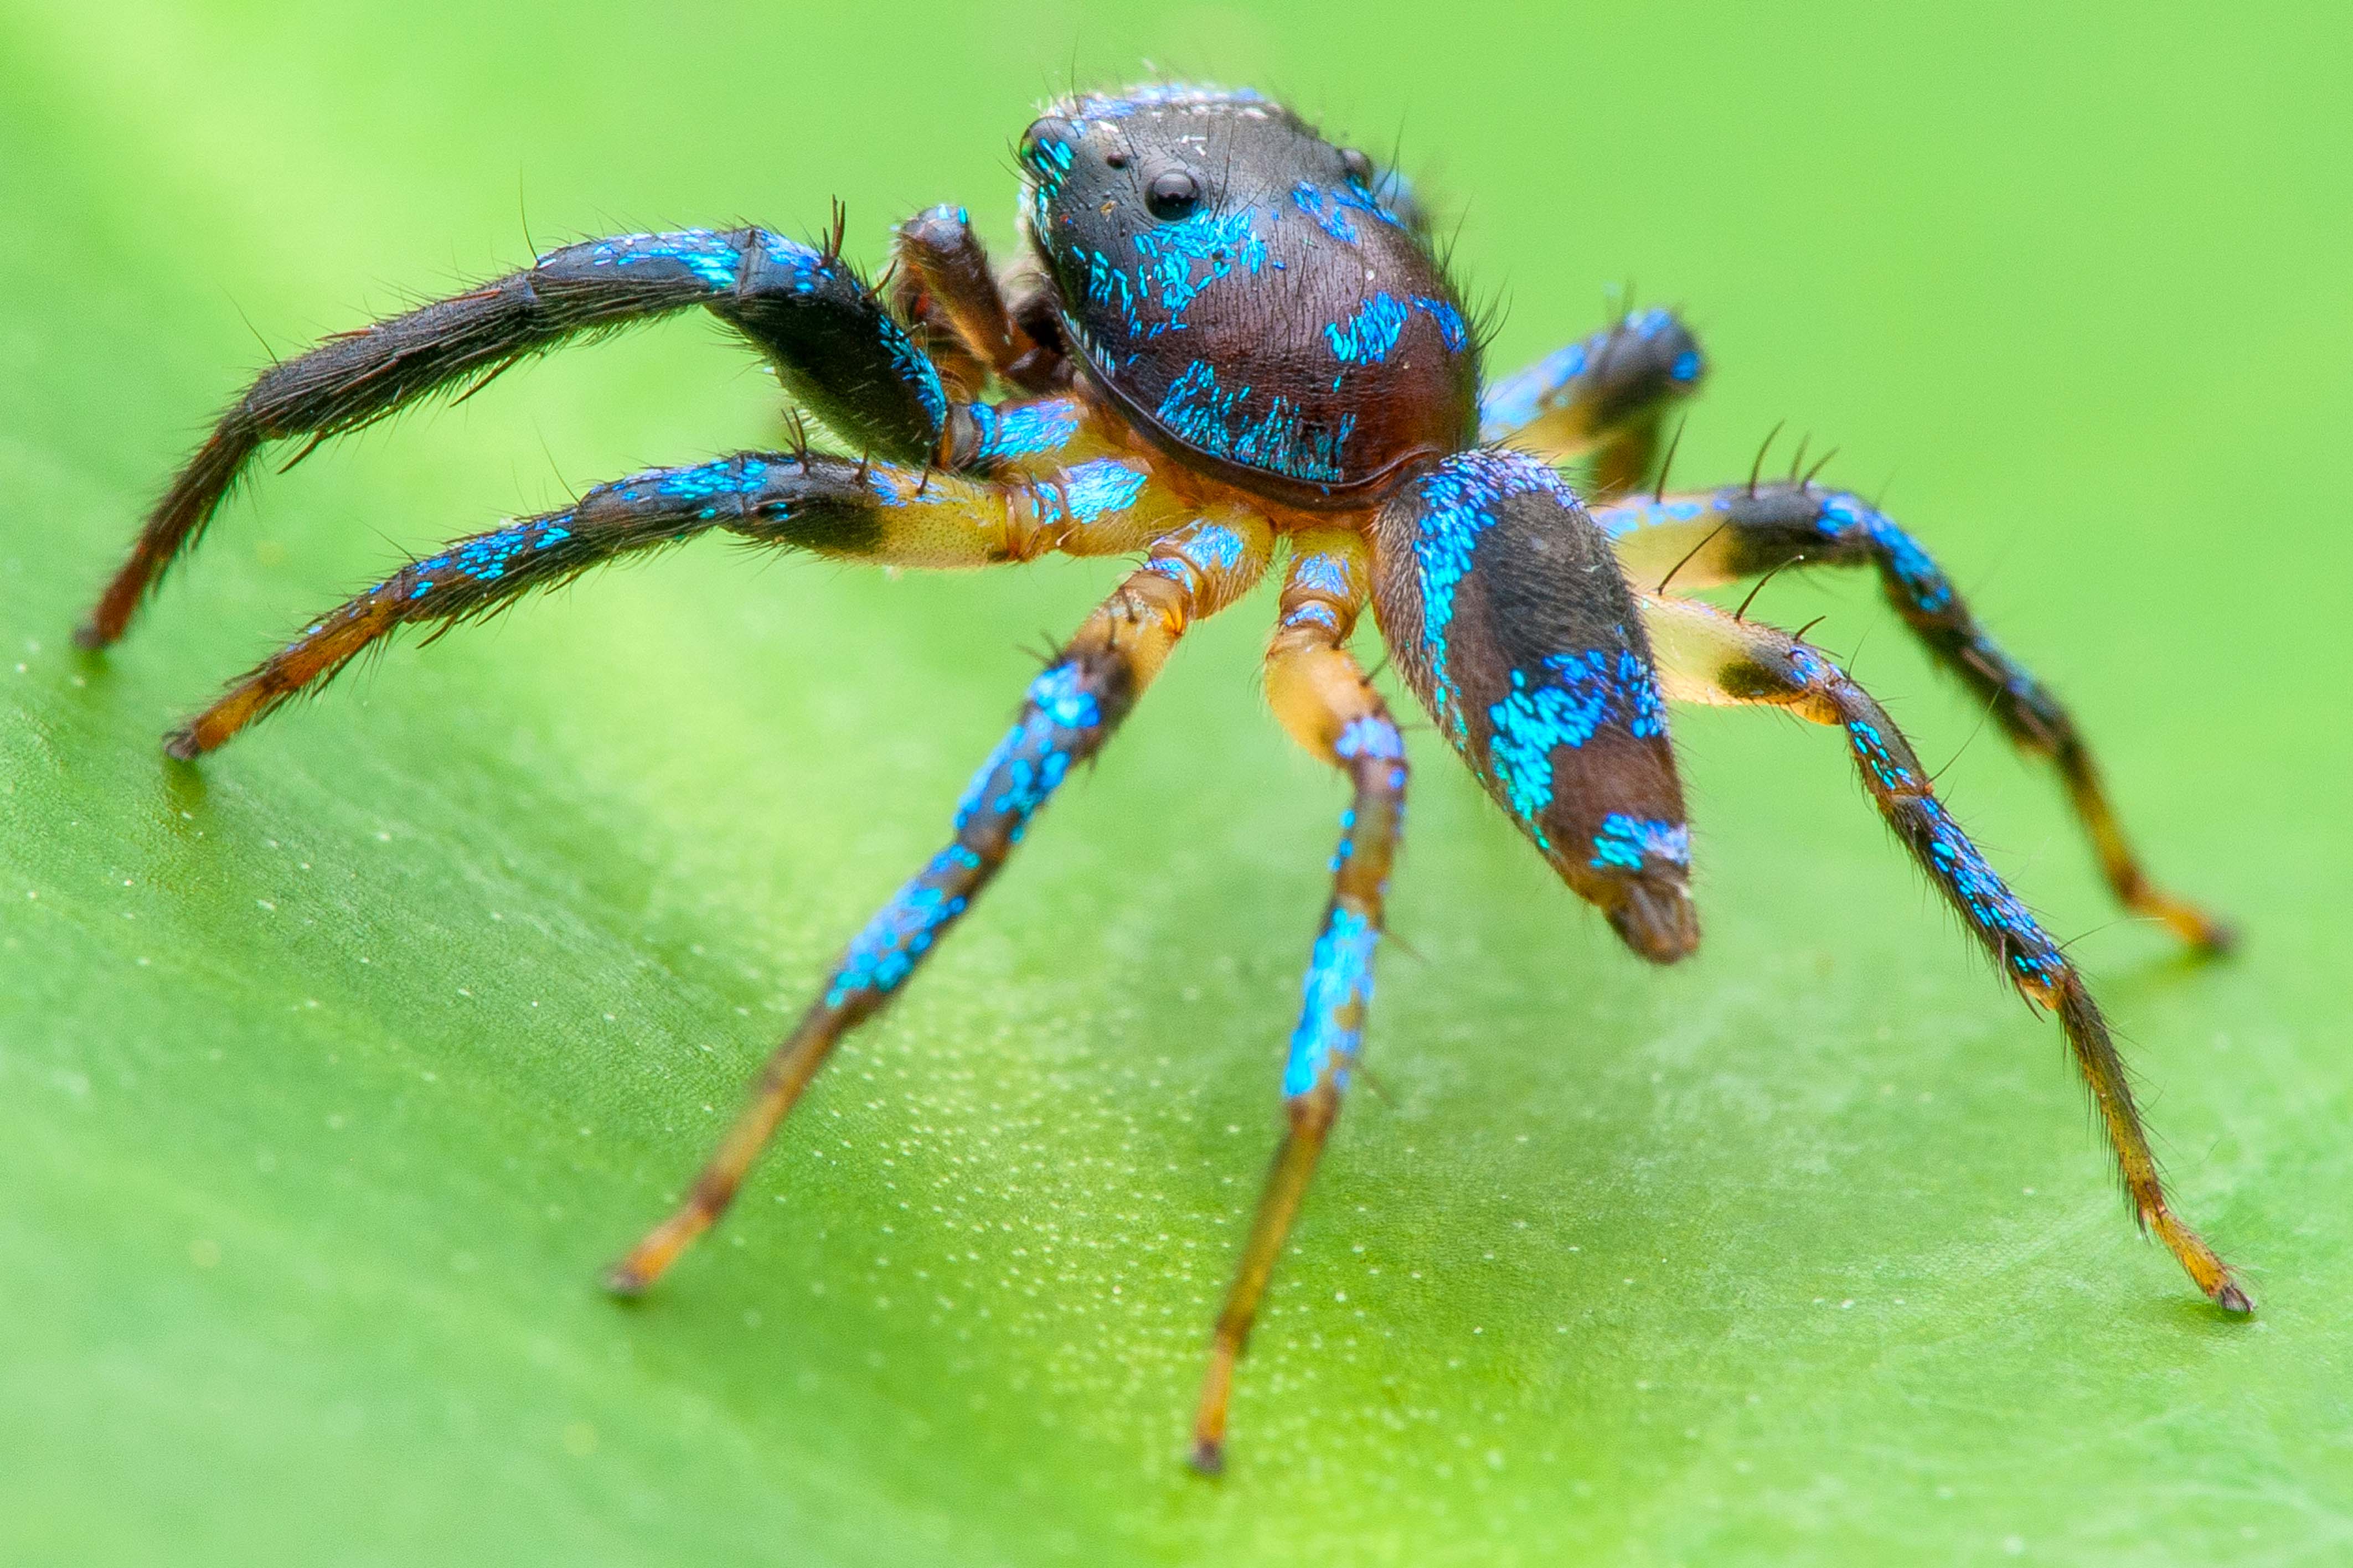 Check out these incredible close up macro photos of spiders ...